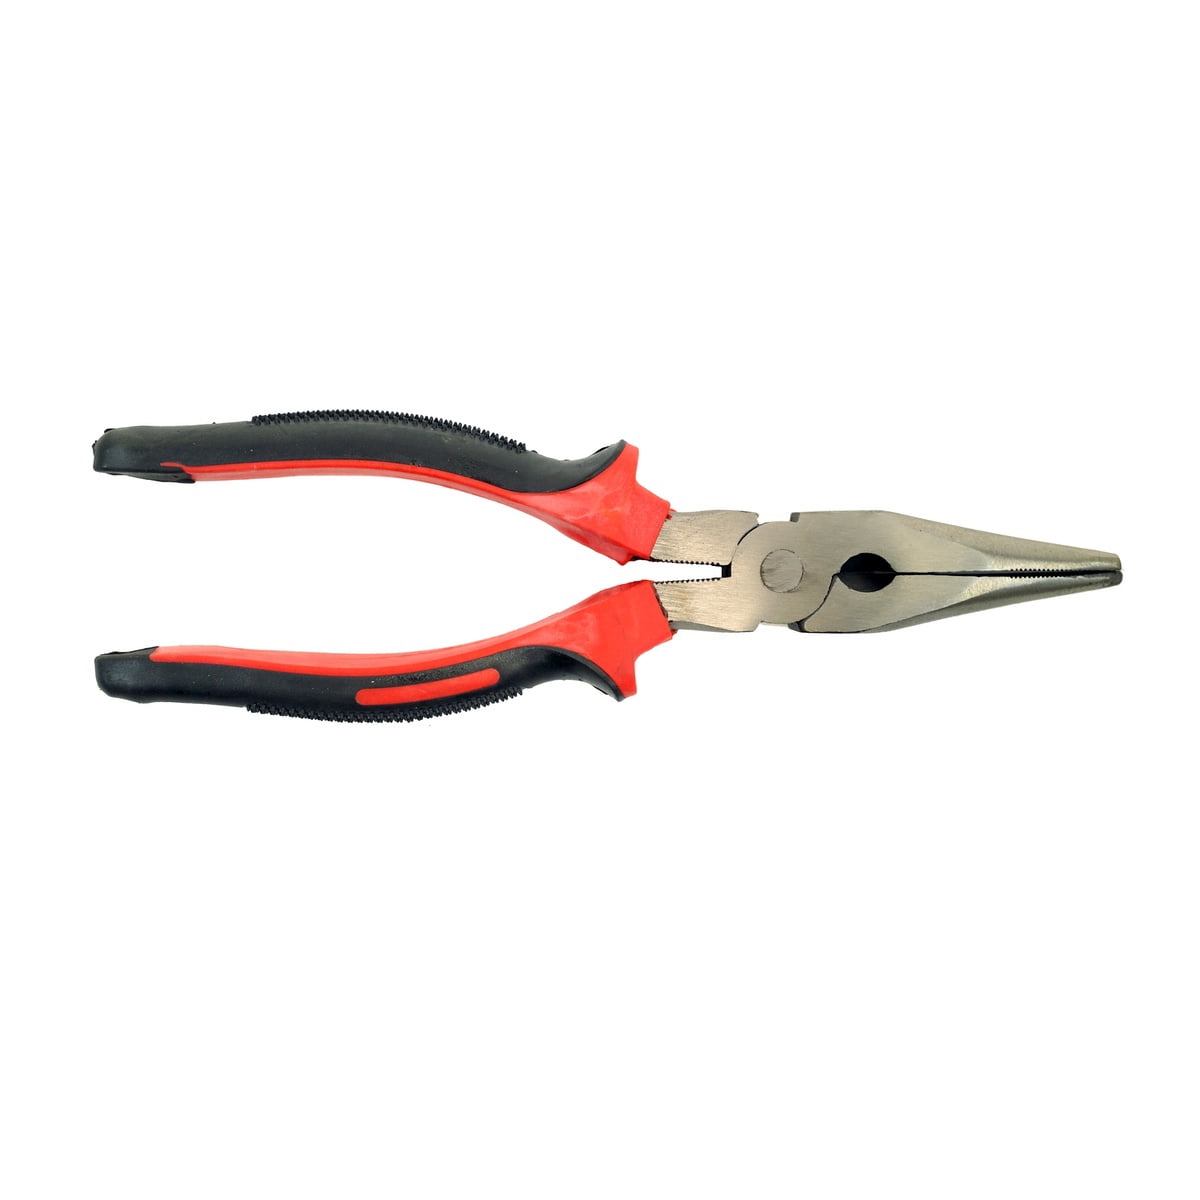 8 Long Needle Nose Pliers Grip Handle Wire Cutters New Home